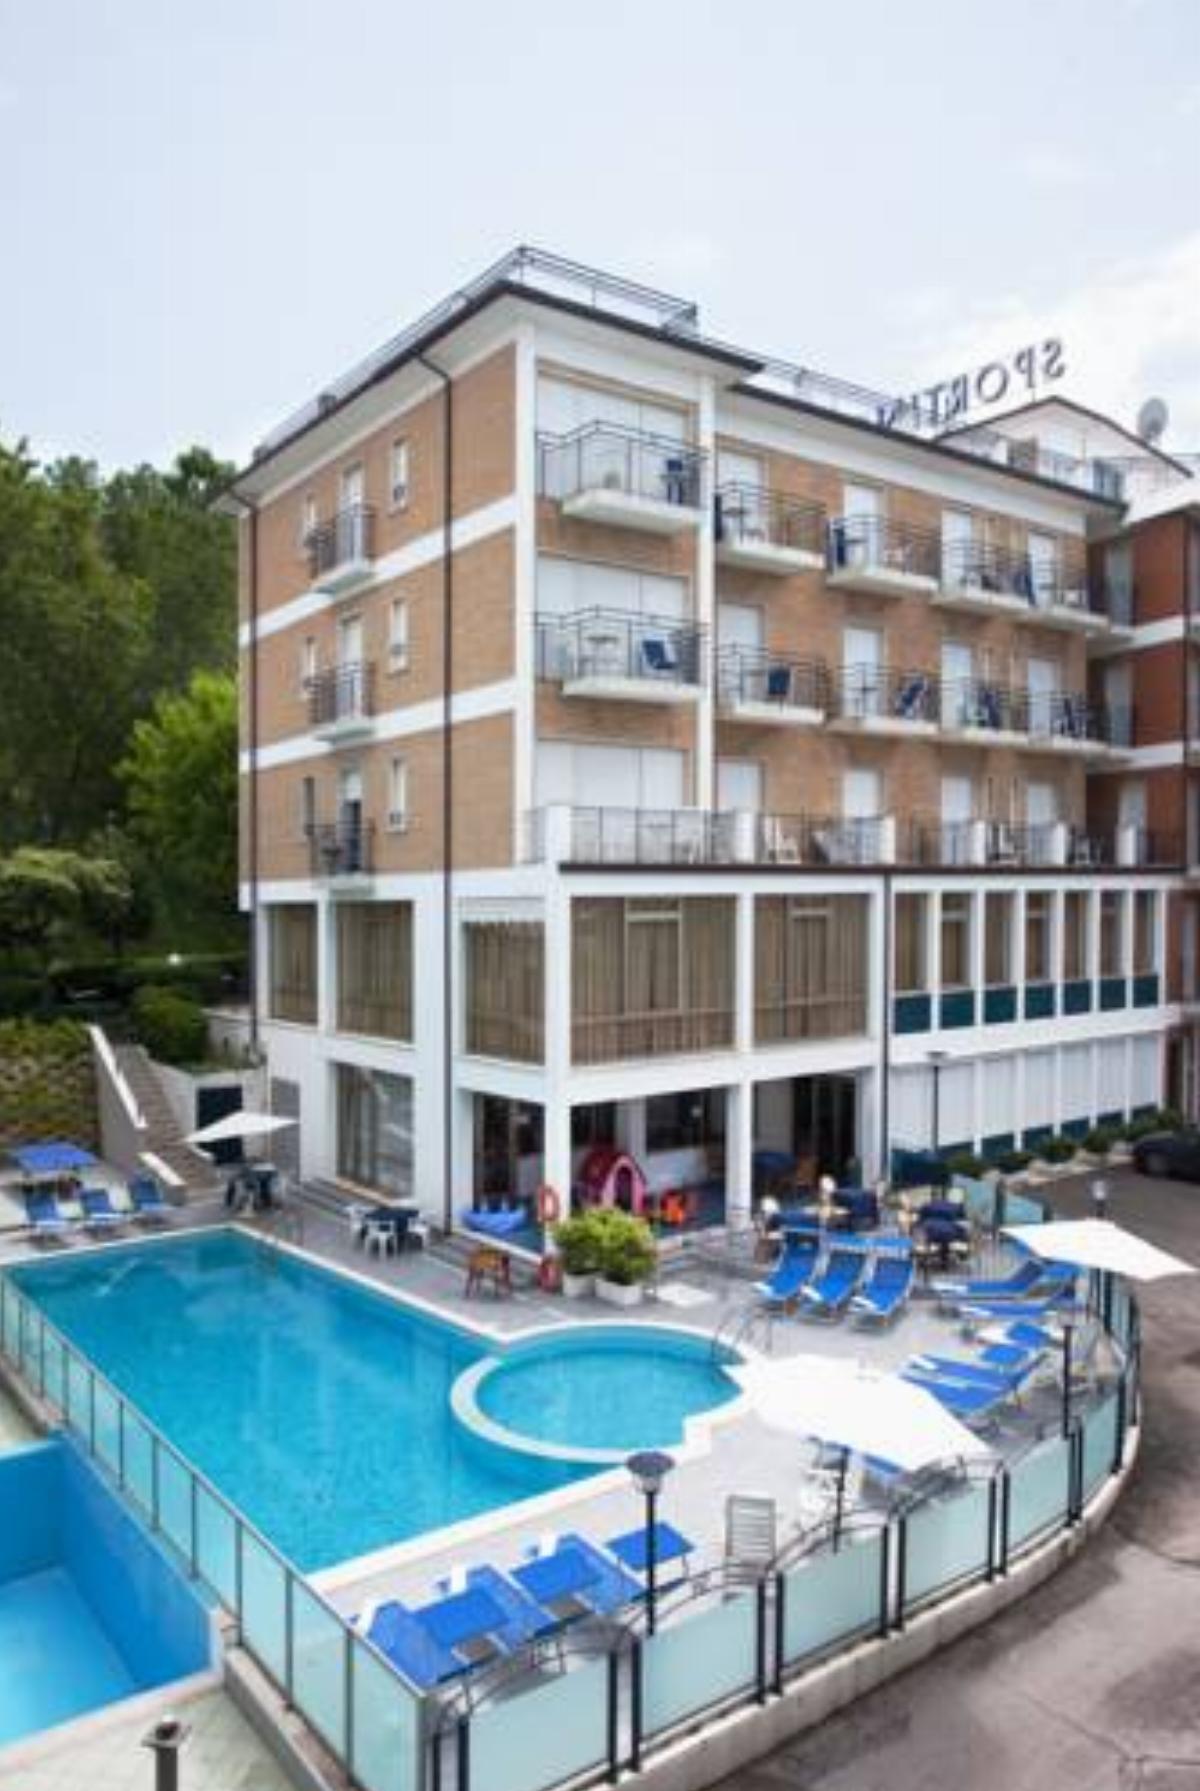 Sporting Hotel Hotel Gabicce Mare Italy